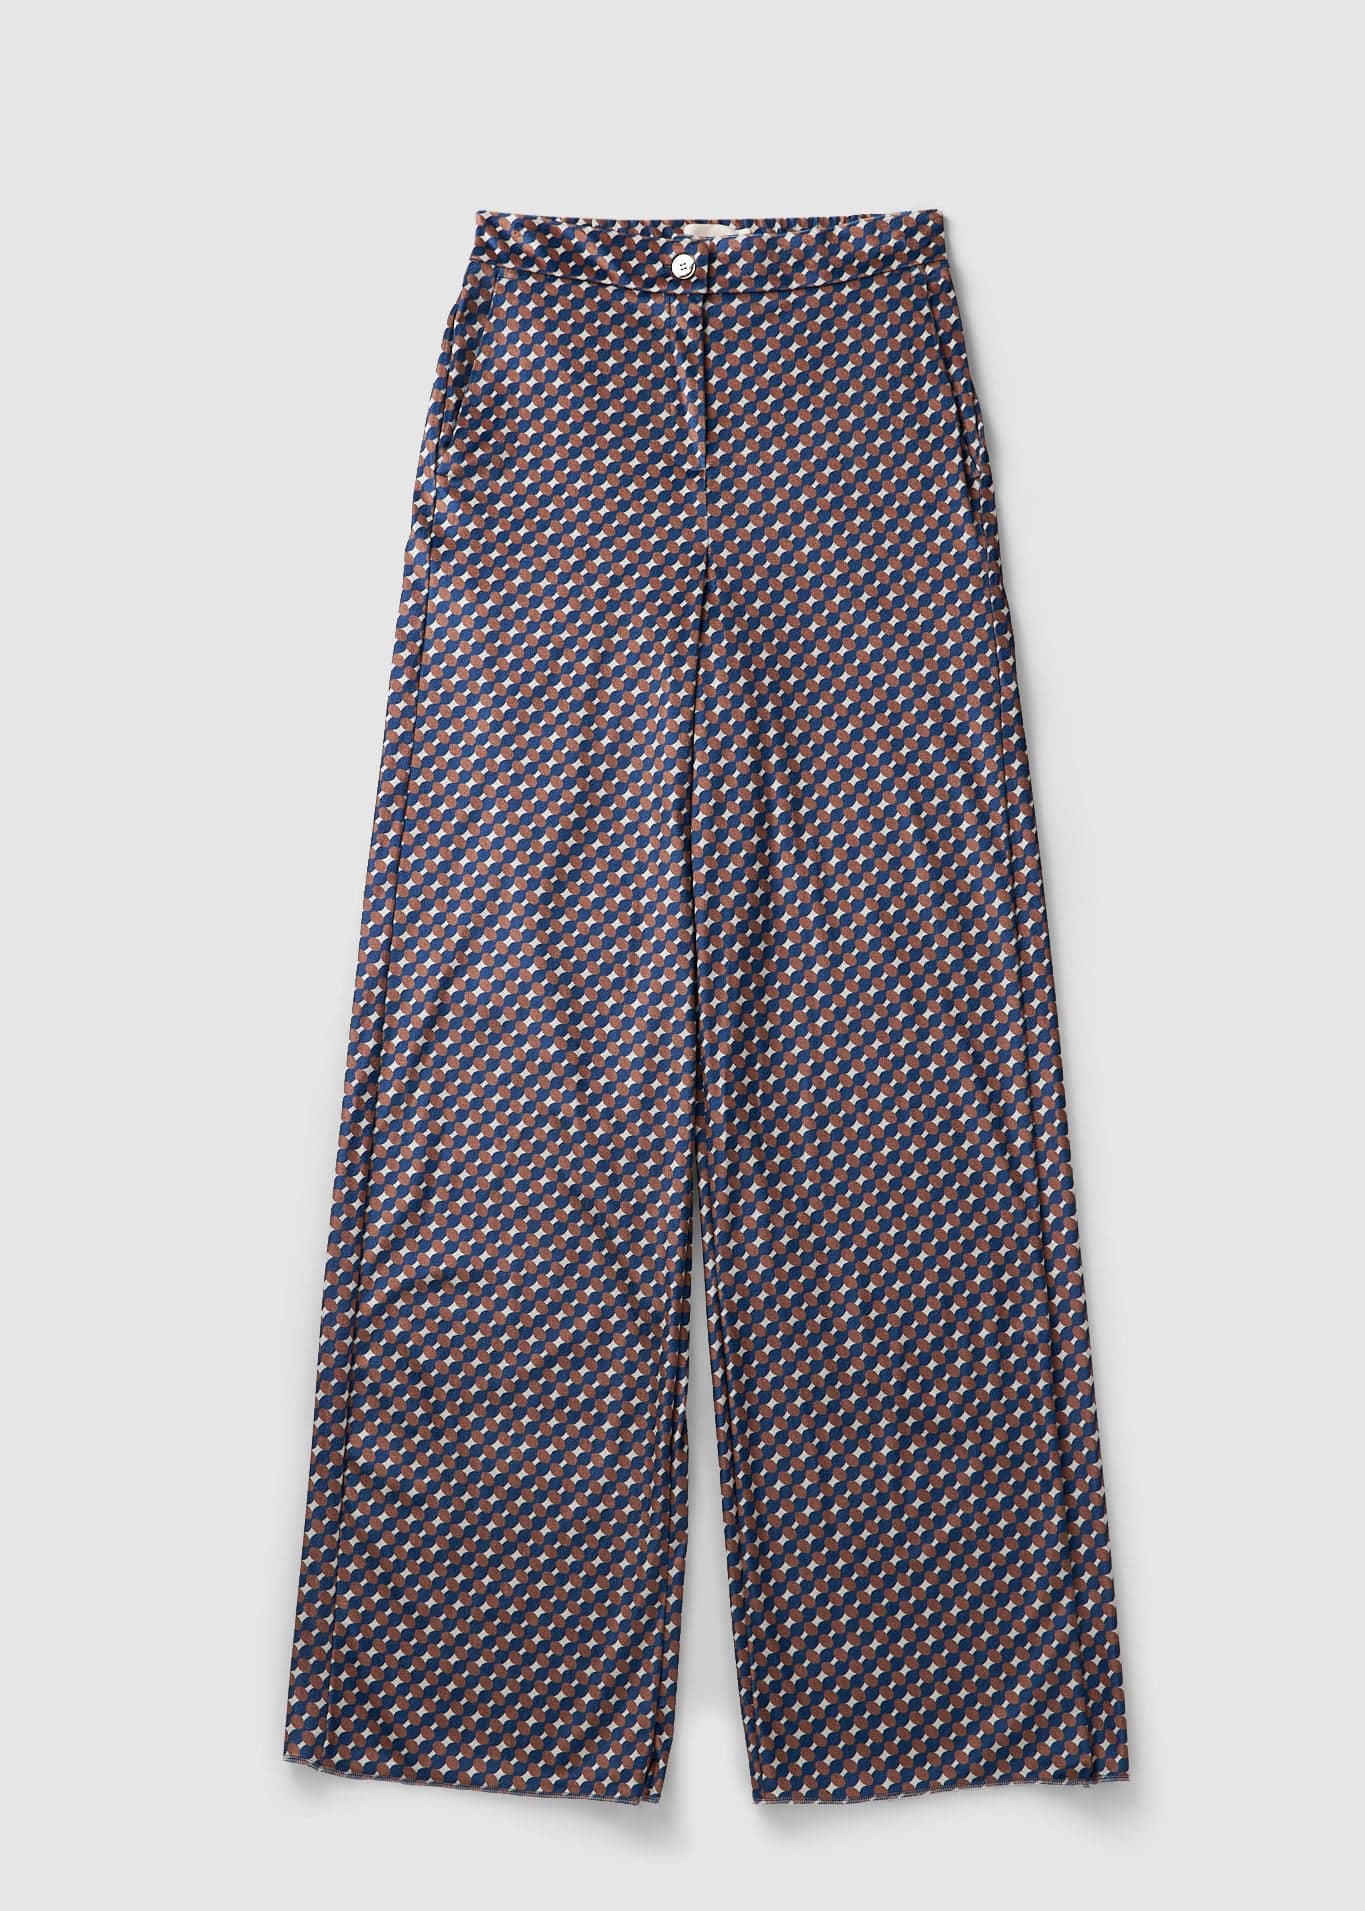 Image of Iblues Womens Antiope Printed Jersey Trousers In Avio